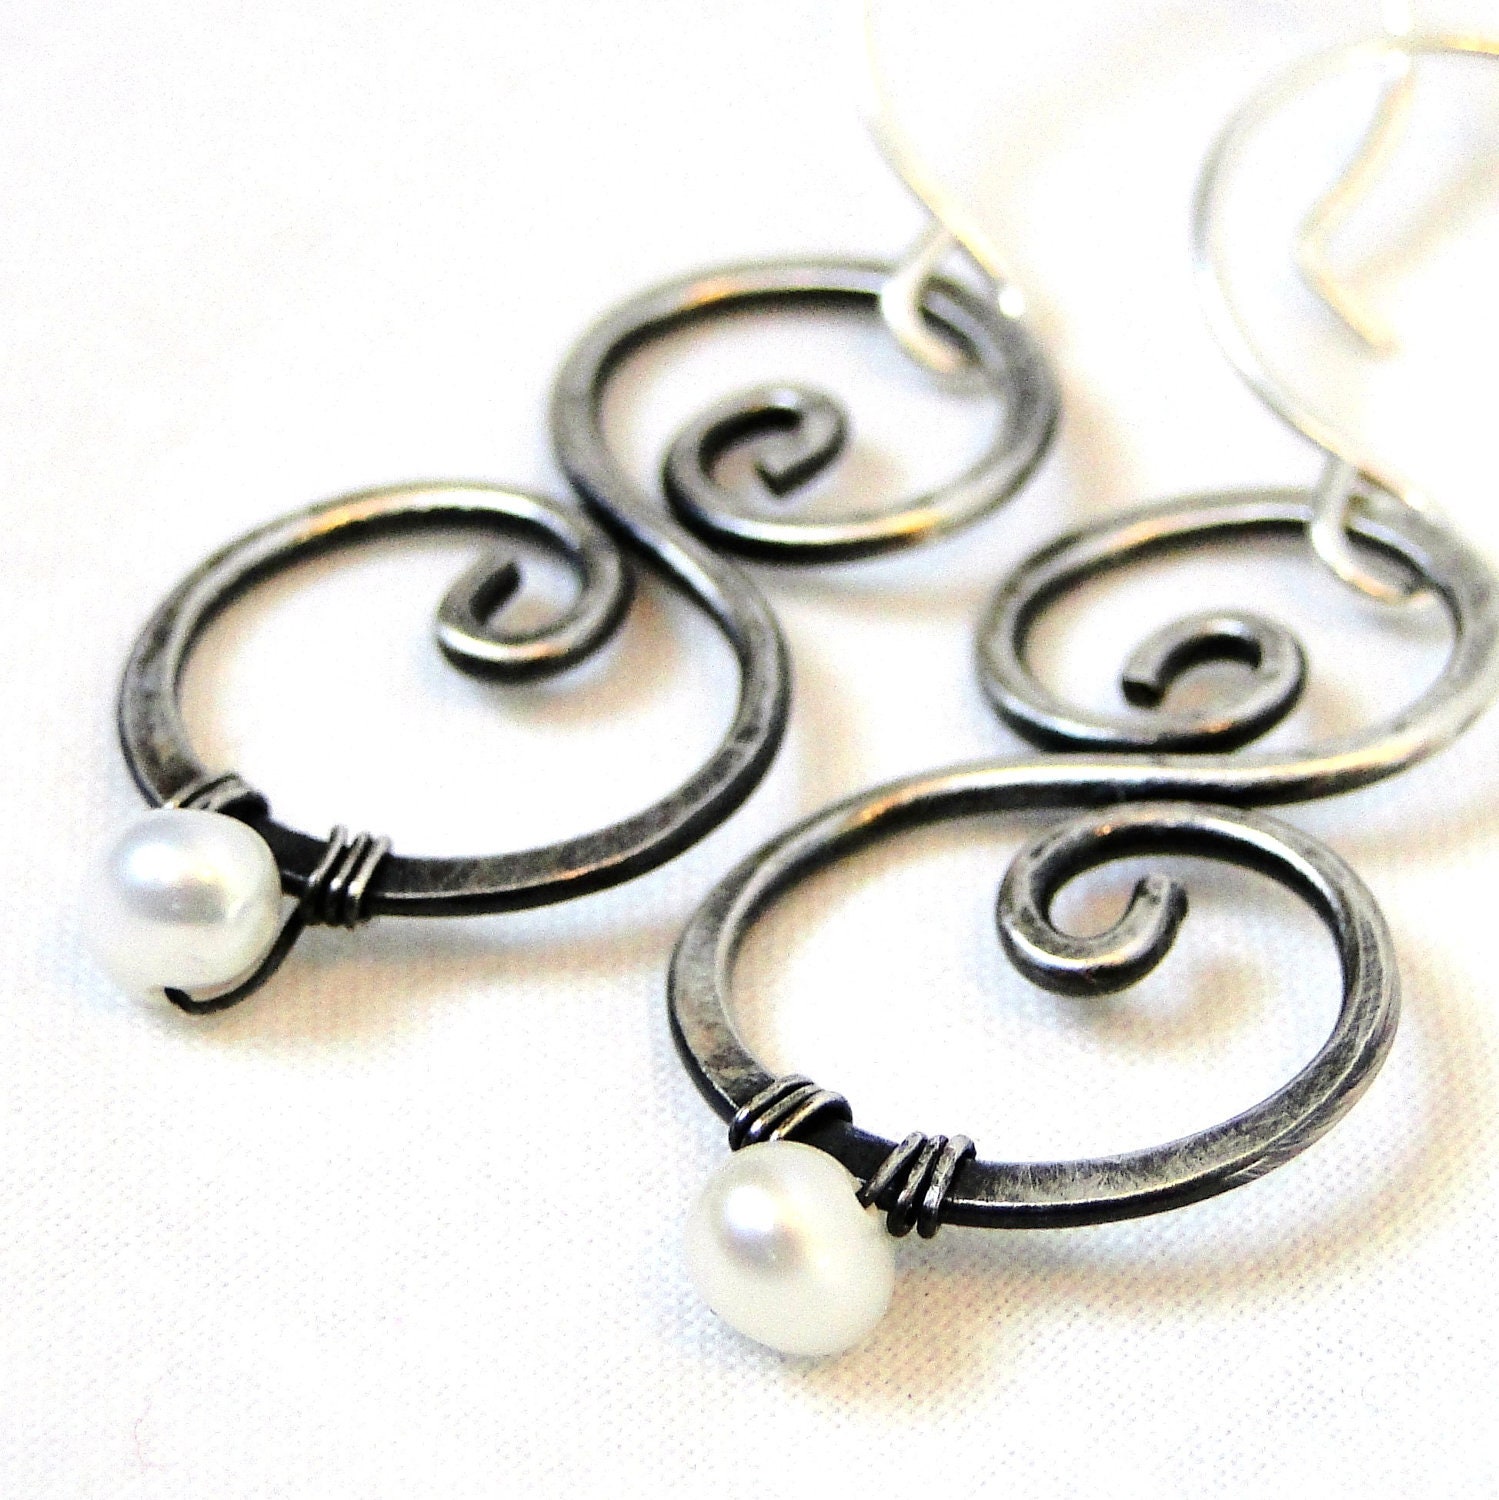 Antiqued Sterling Silver Freshwater Pearl Scroll Earrings Handcrafted Jewelry - KariLuJewelry